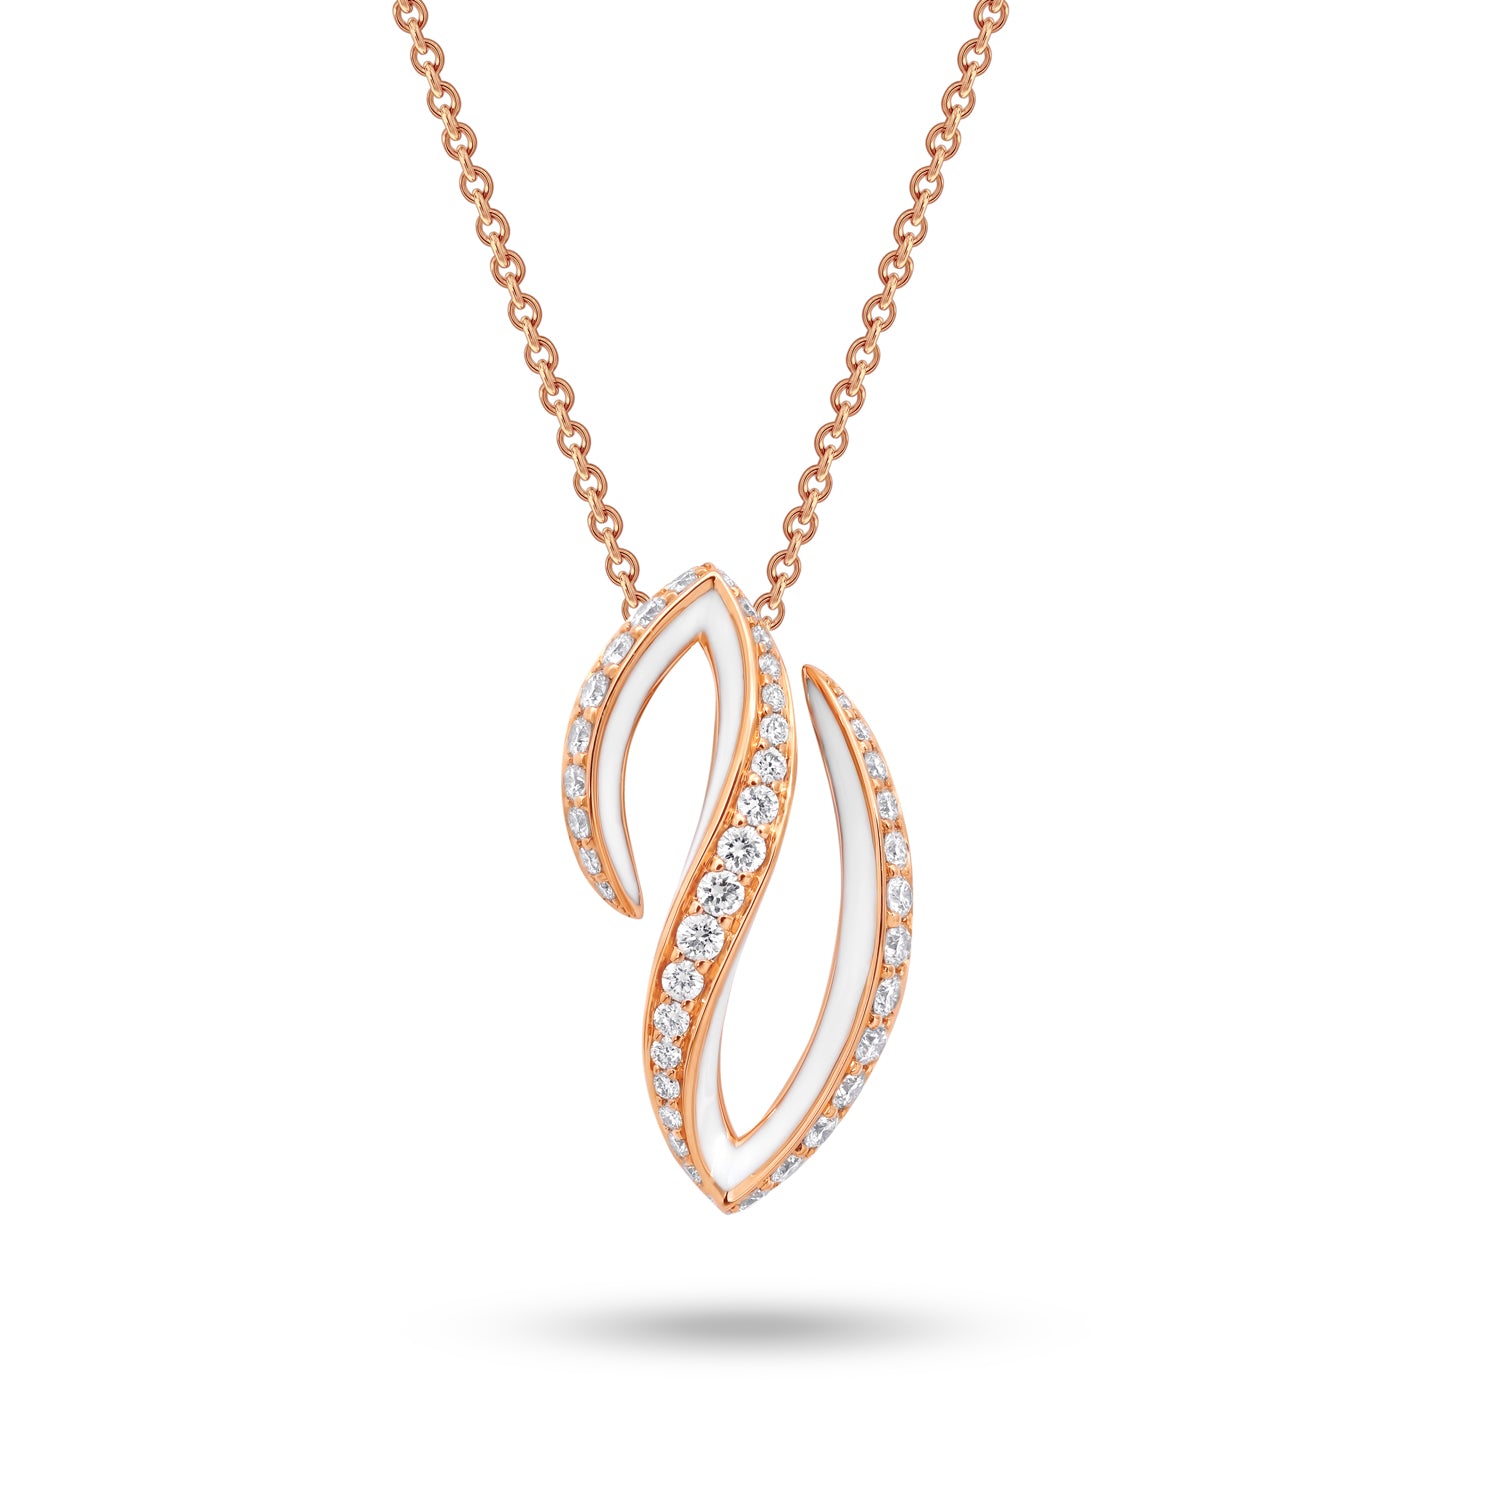 VIVA small Curved Necklace with Diamonds and White Enamel